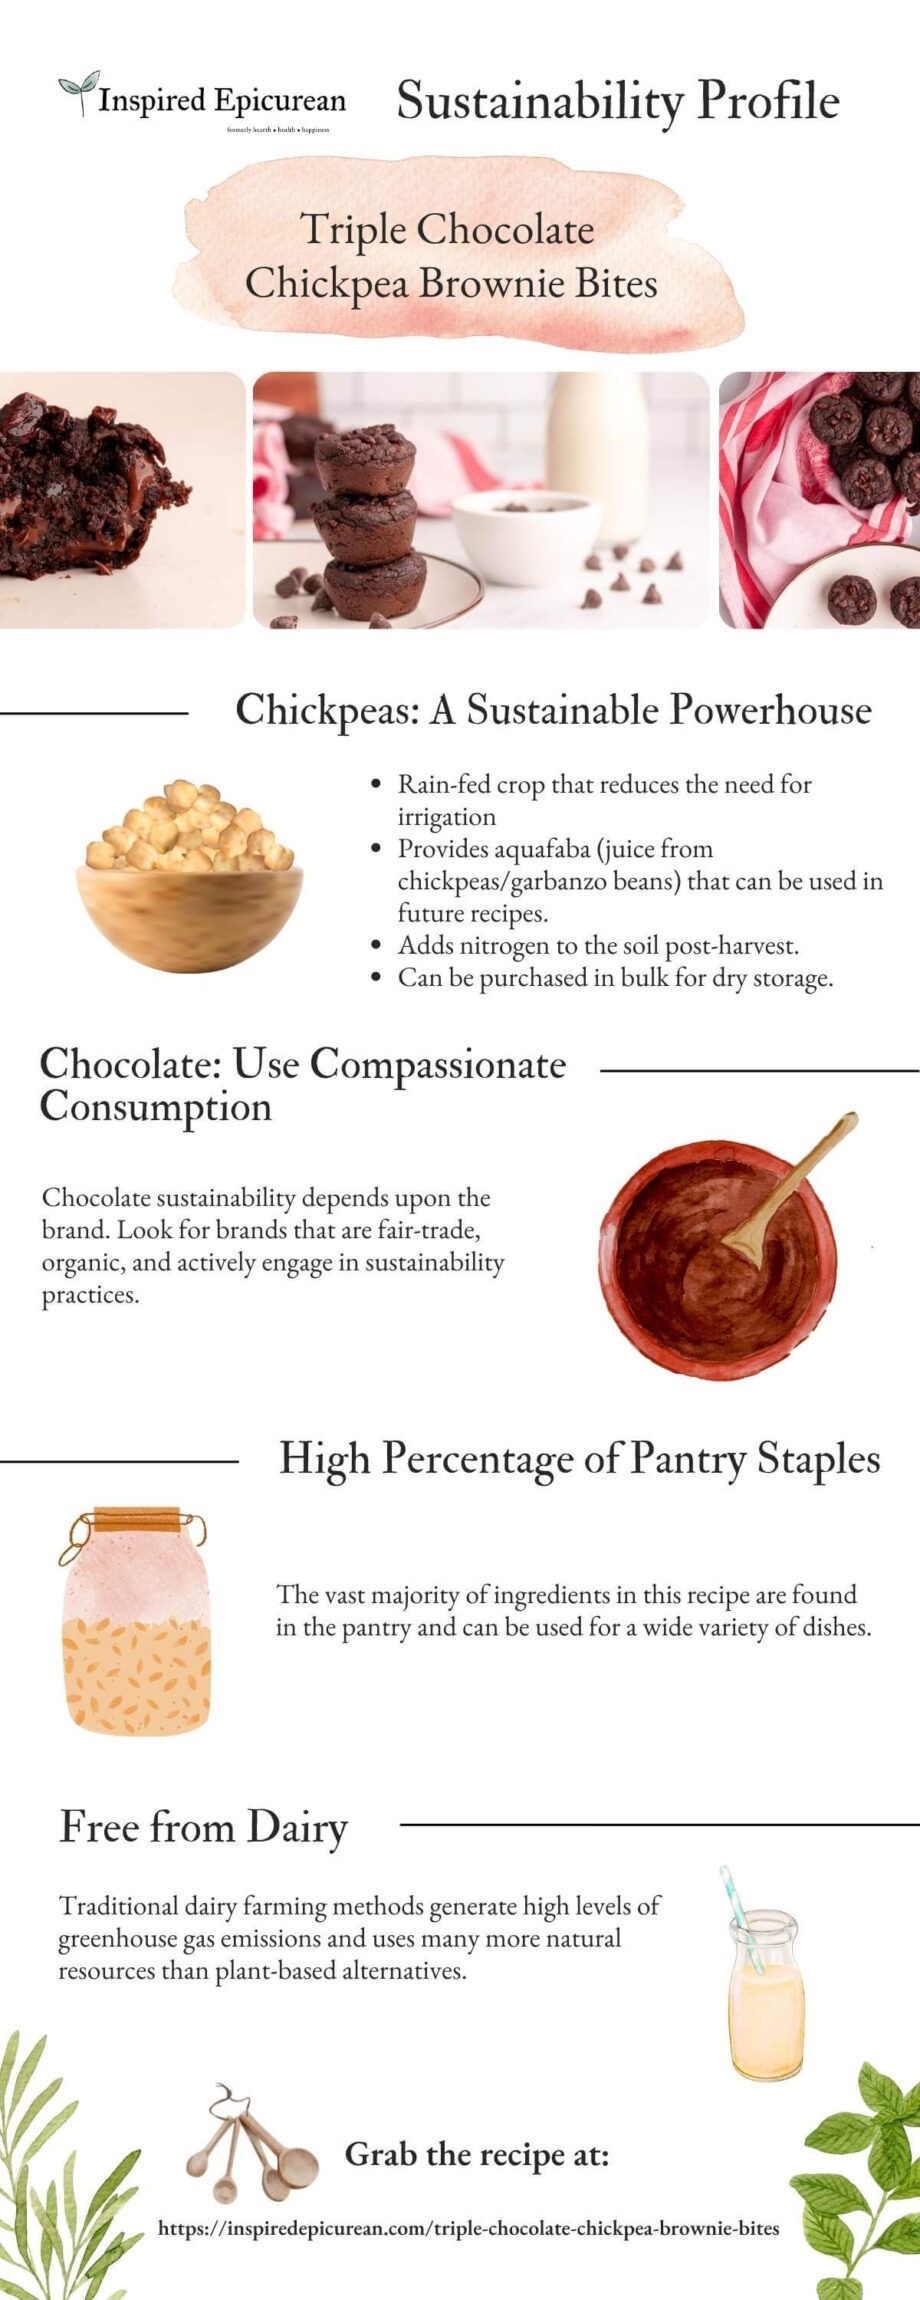 Images and text outlining what makes this recipe sustainable